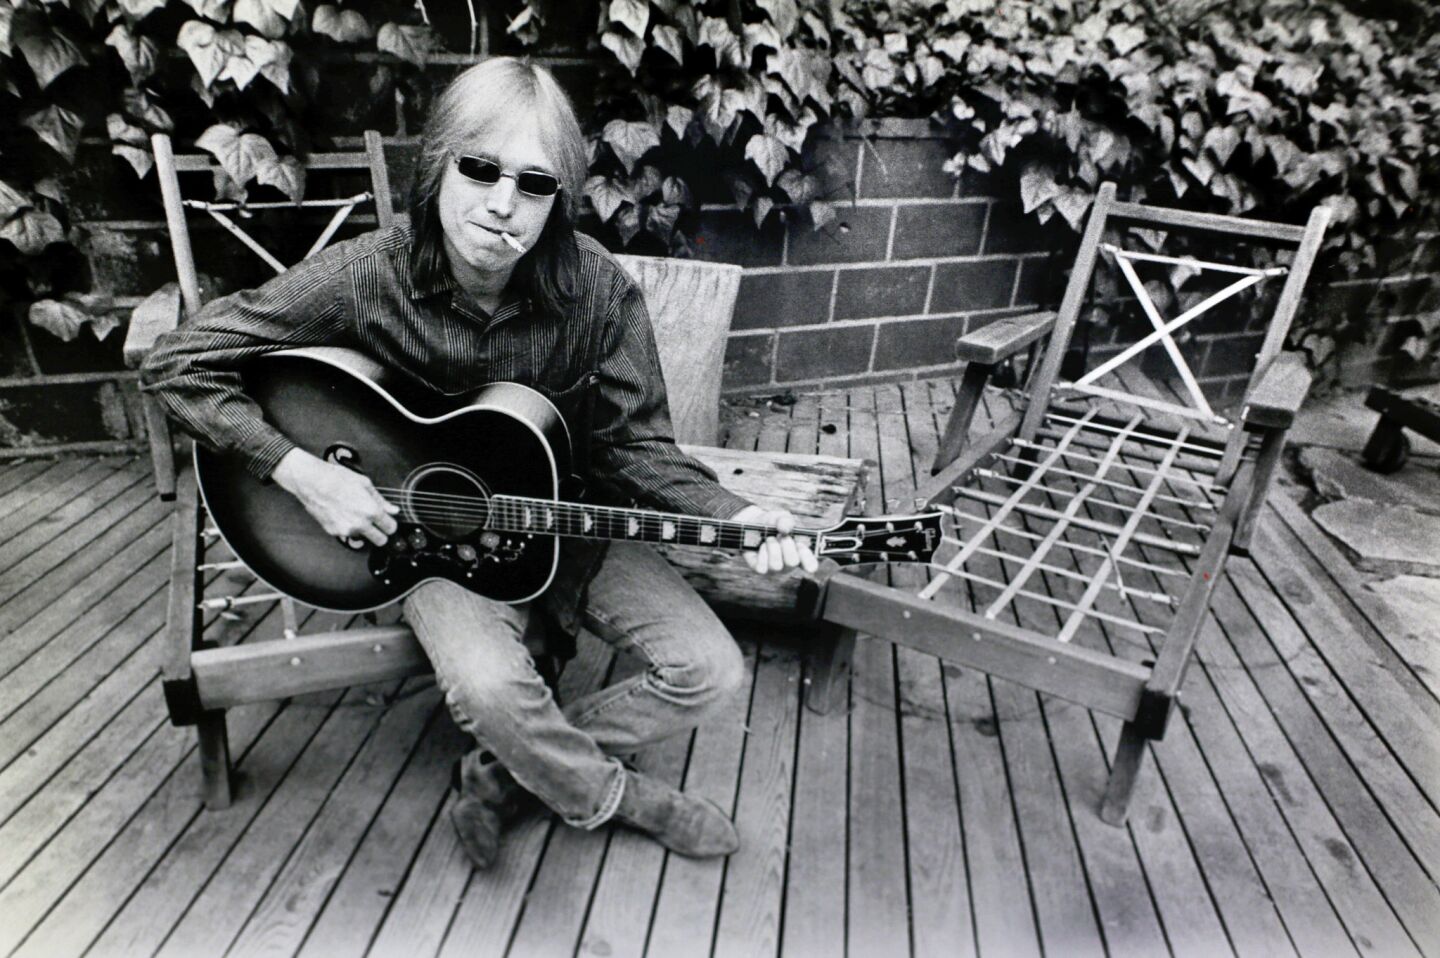 Tom Petty | Career in pictures